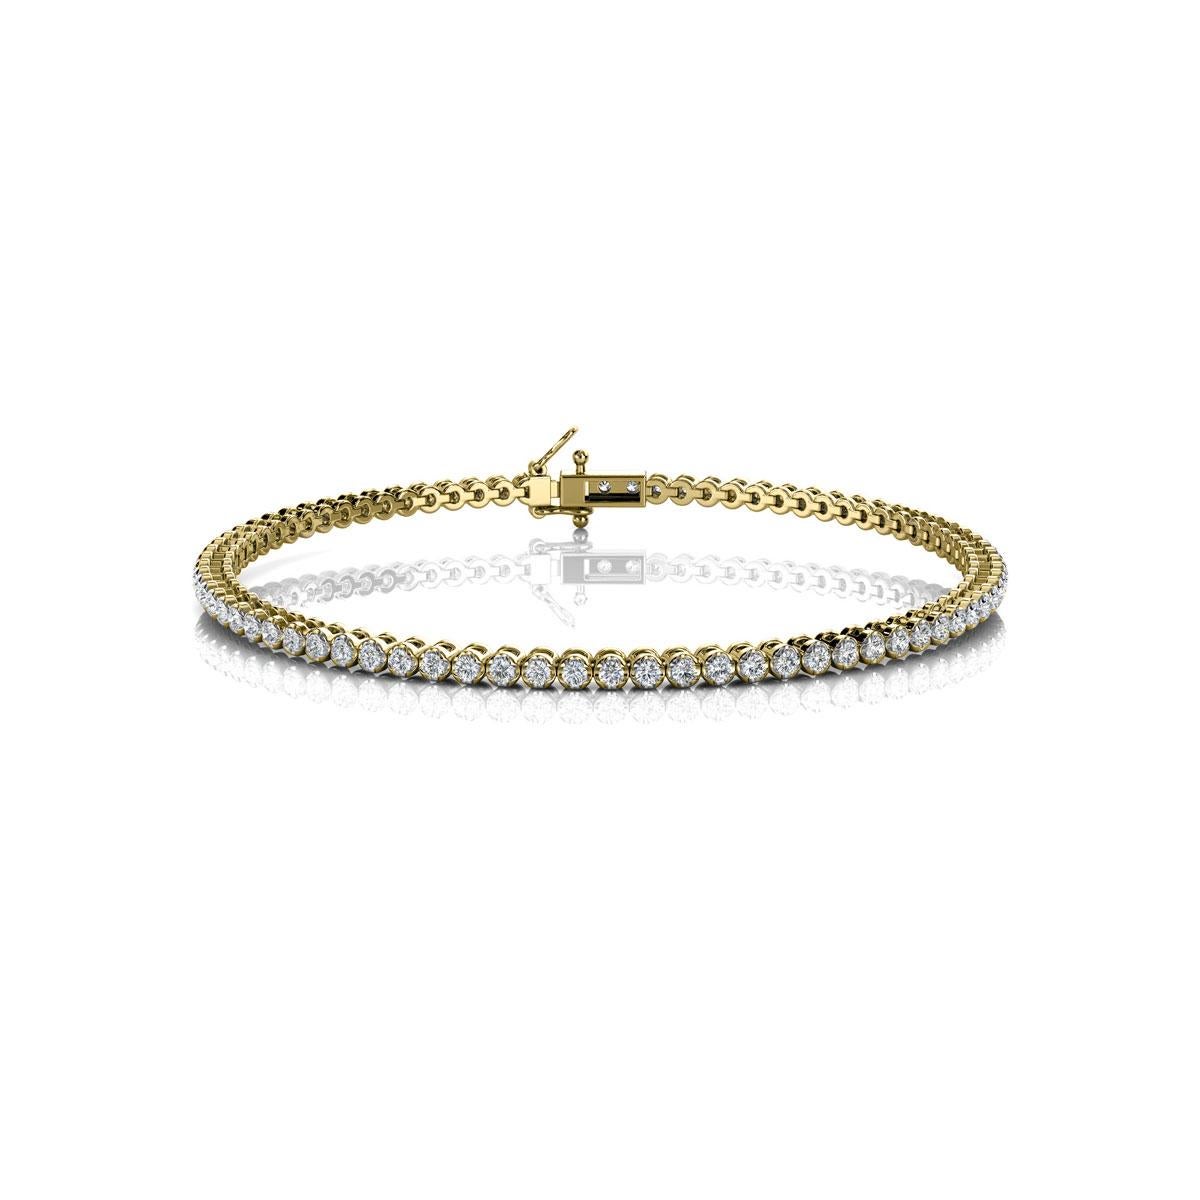 A timeless four prongs diamonds tennis bracelet. Experience the Difference!

Product details: 

Center Gemstone Type: NATURAL DIAMOND
Center Gemstone Color: WHITE
Center Gemstone Shape: ROUND
Center Diamond Carat Weight: 0.97
Metal: 14K Yellow